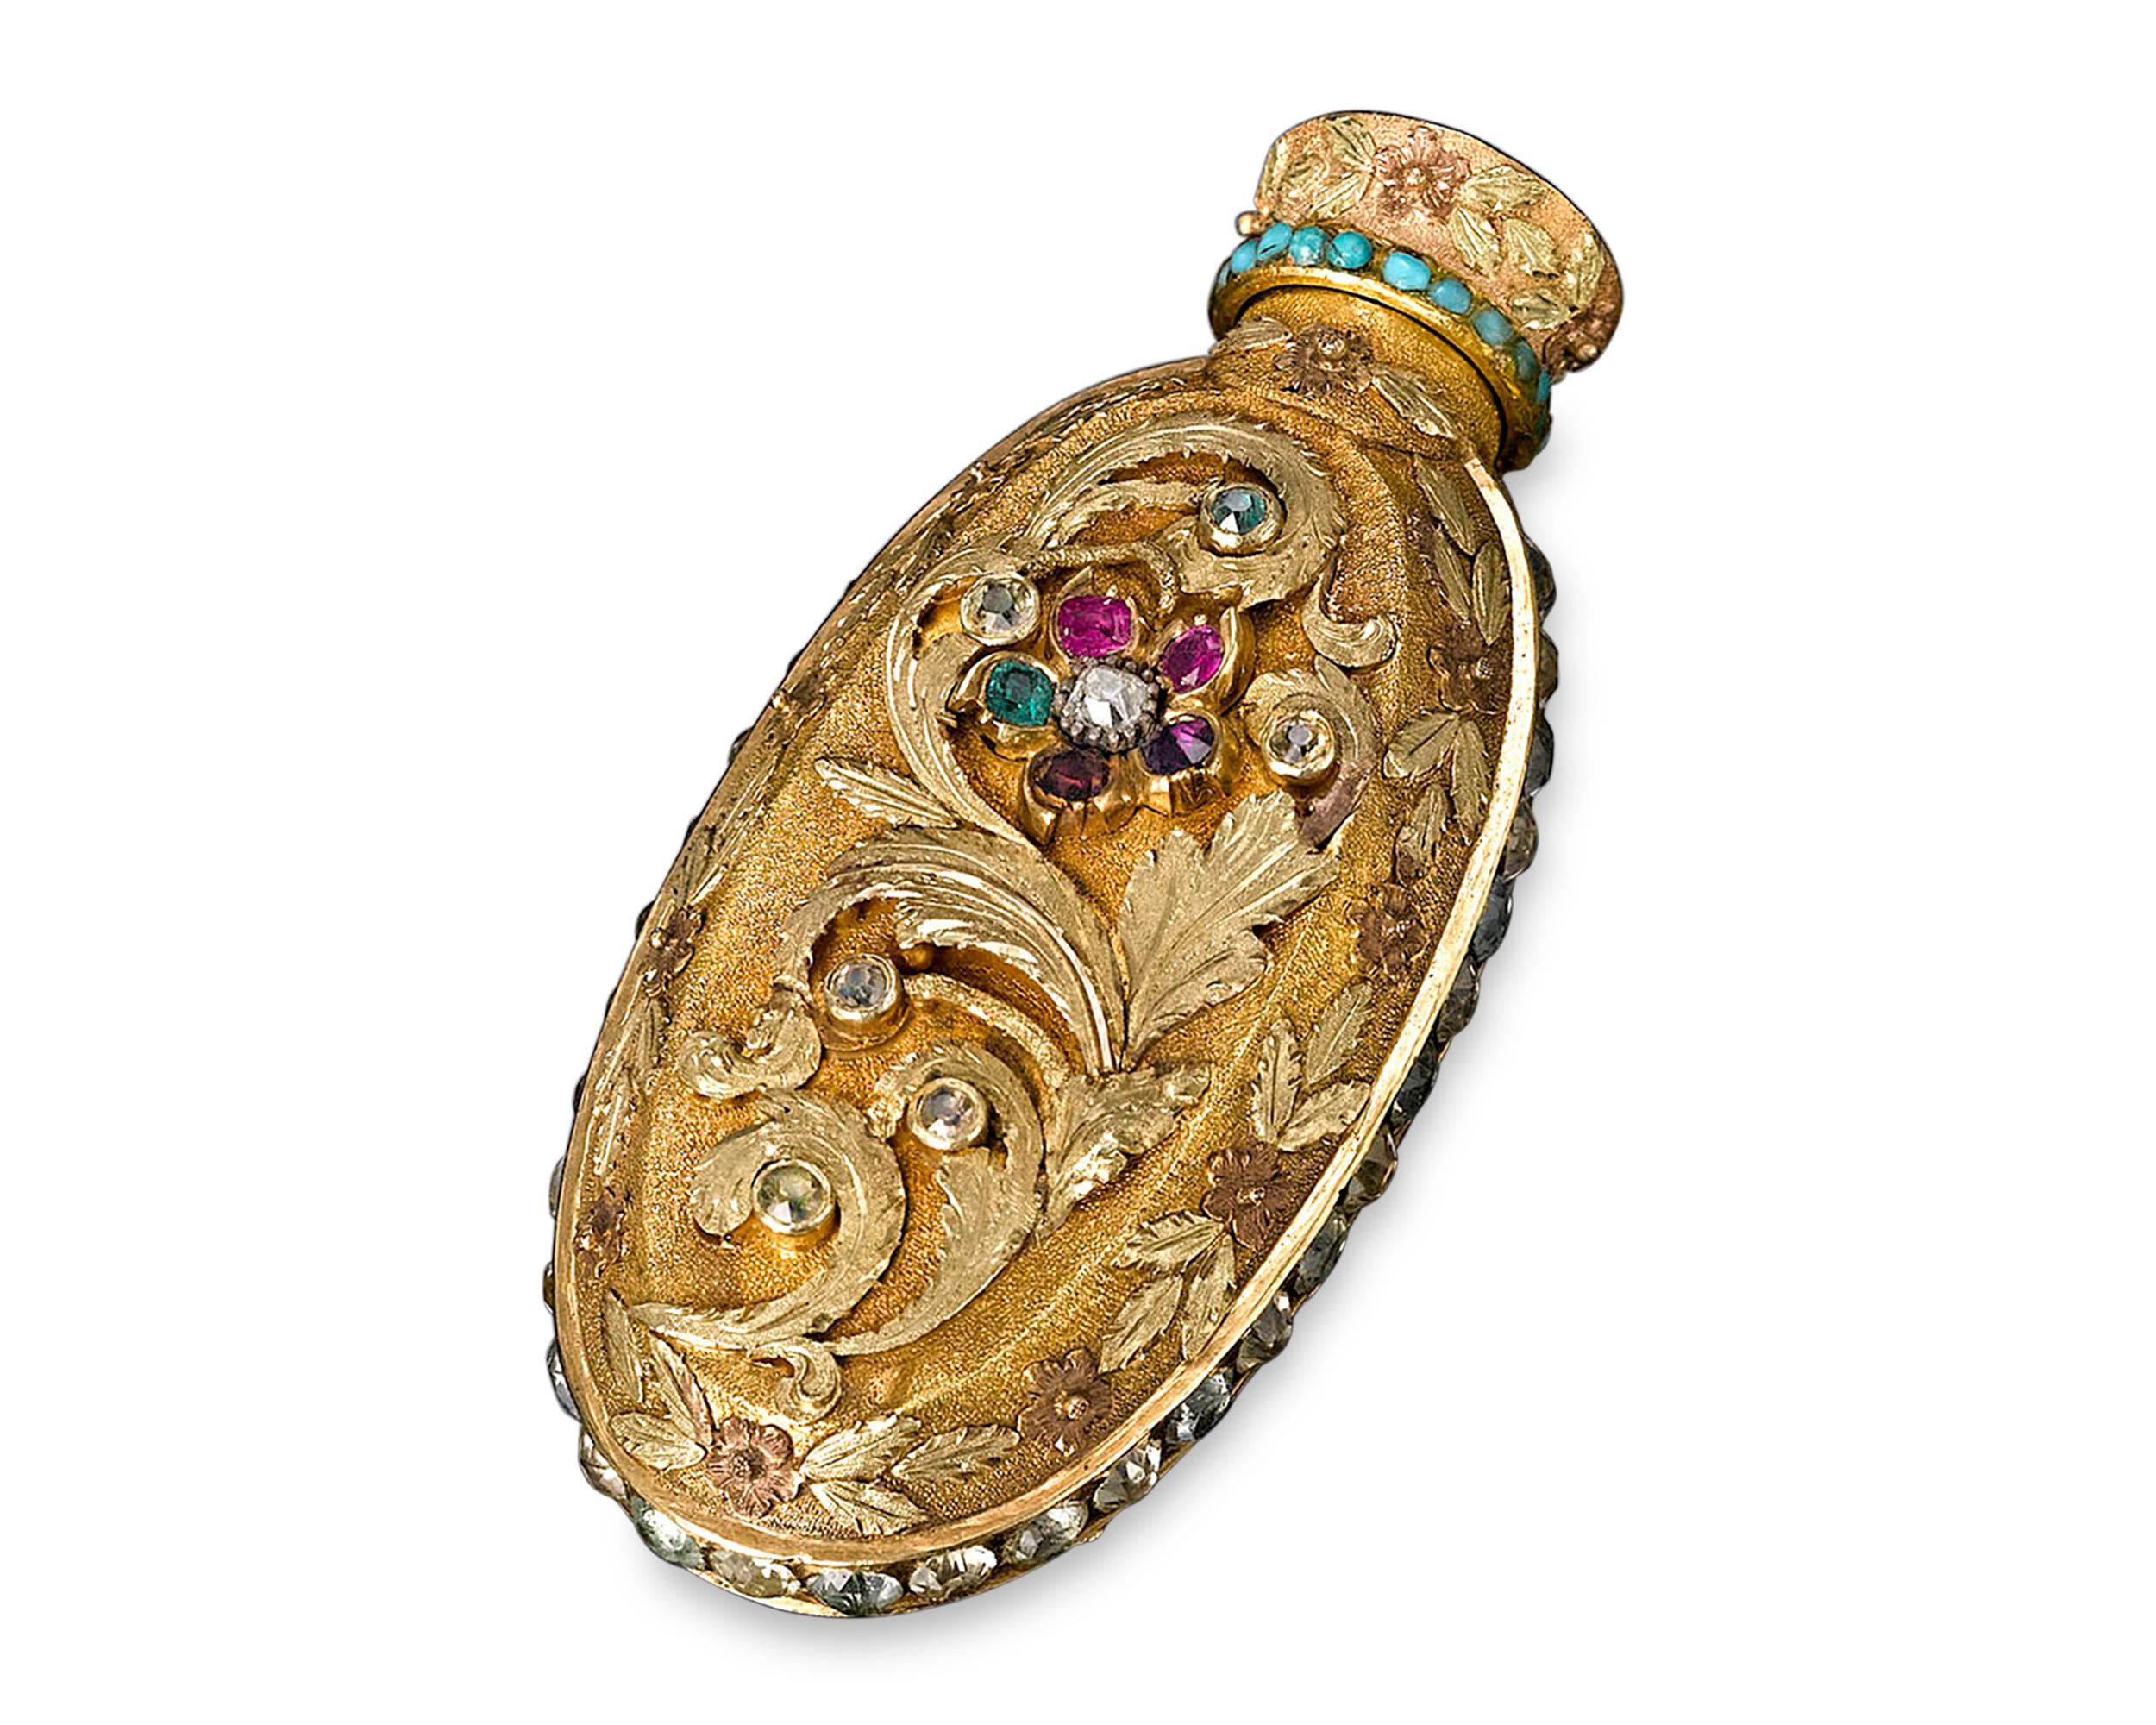 This rare and captivating English bottle contains a hidden treasure. Crafted of yellow gold and designed to hold perfume, snuff, or even smelling salts, this bottle is exquisitely decorated, from the bold applied acanthus leaves to the sparkling